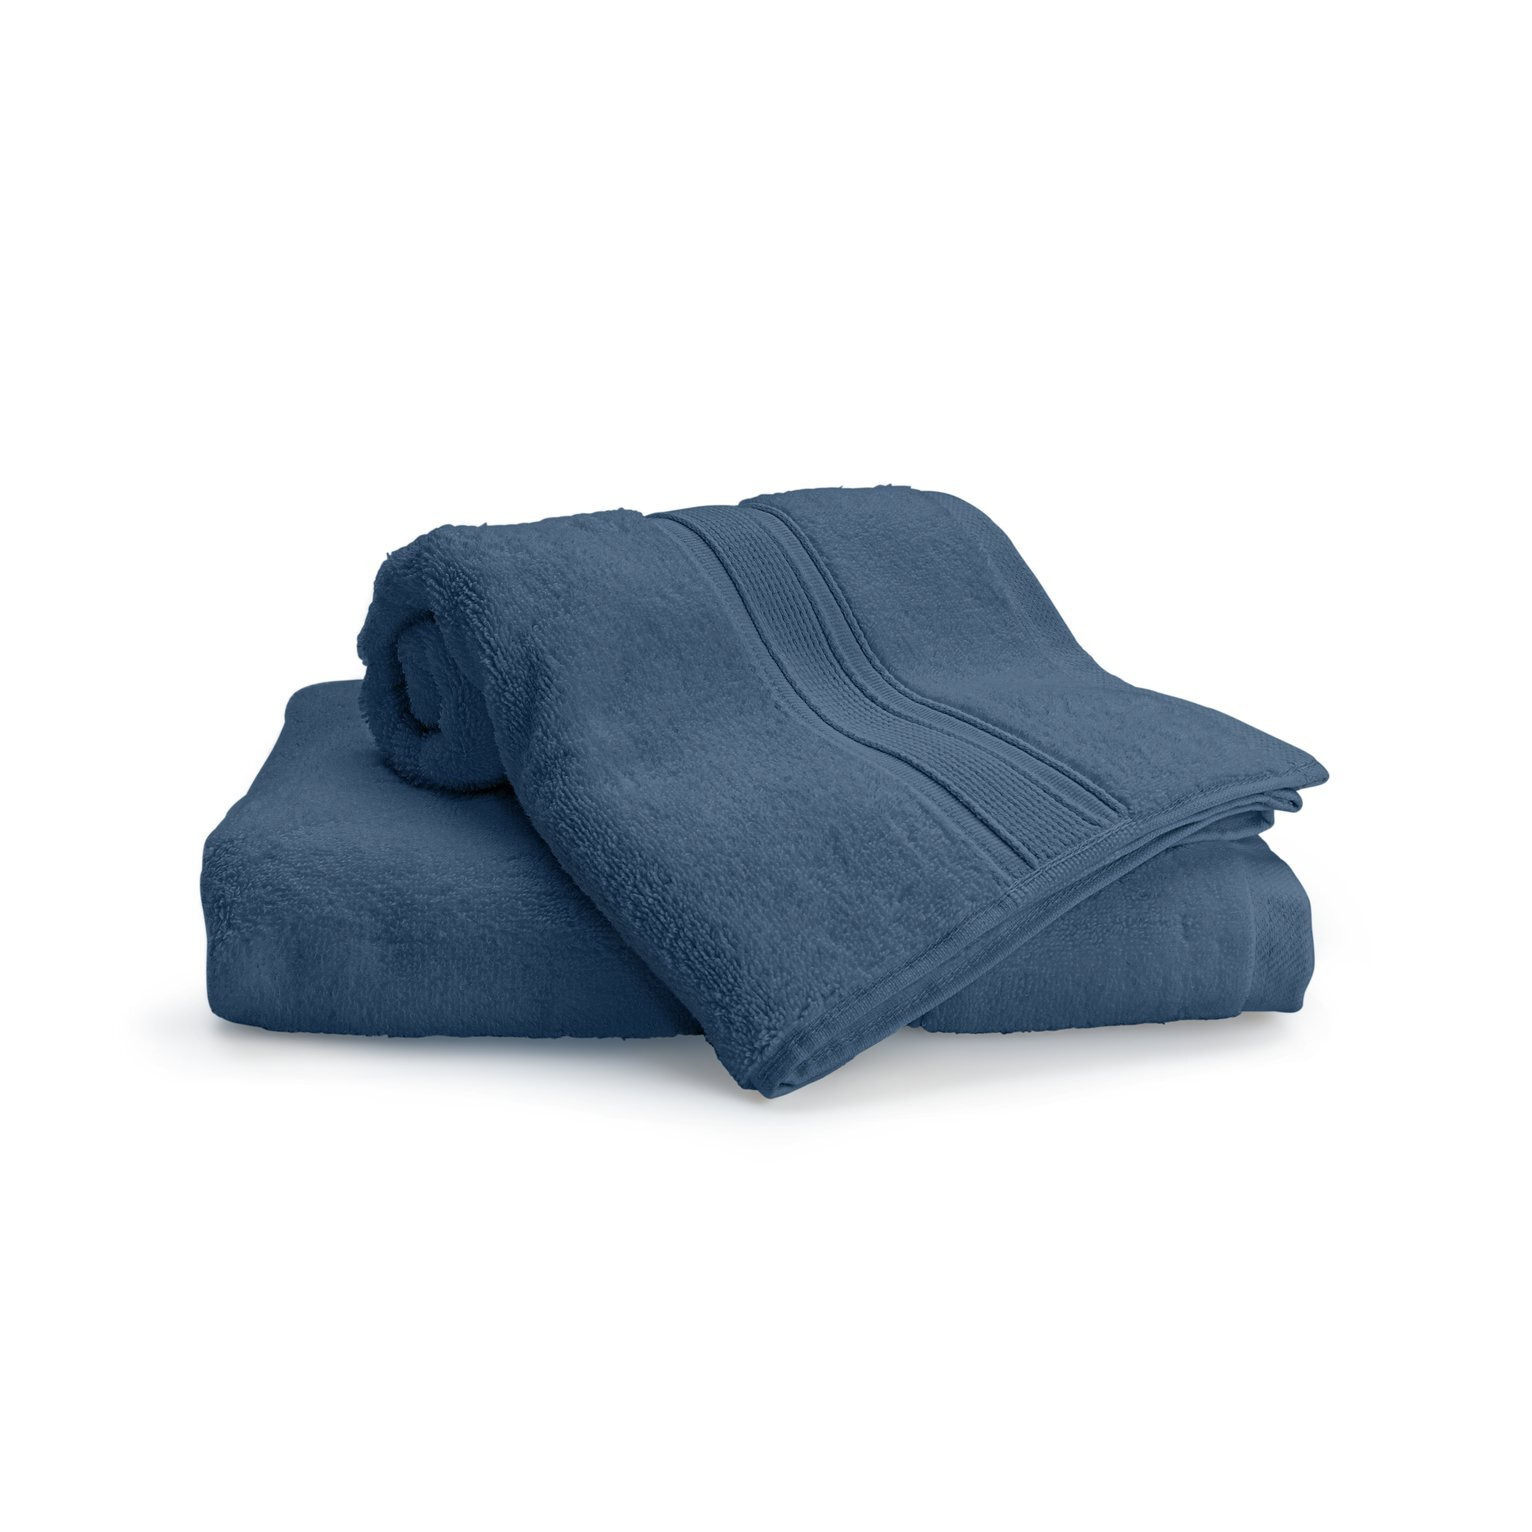 Habitat Cotton Supersoft 2 Pack Face Cloth - Navy - image 1